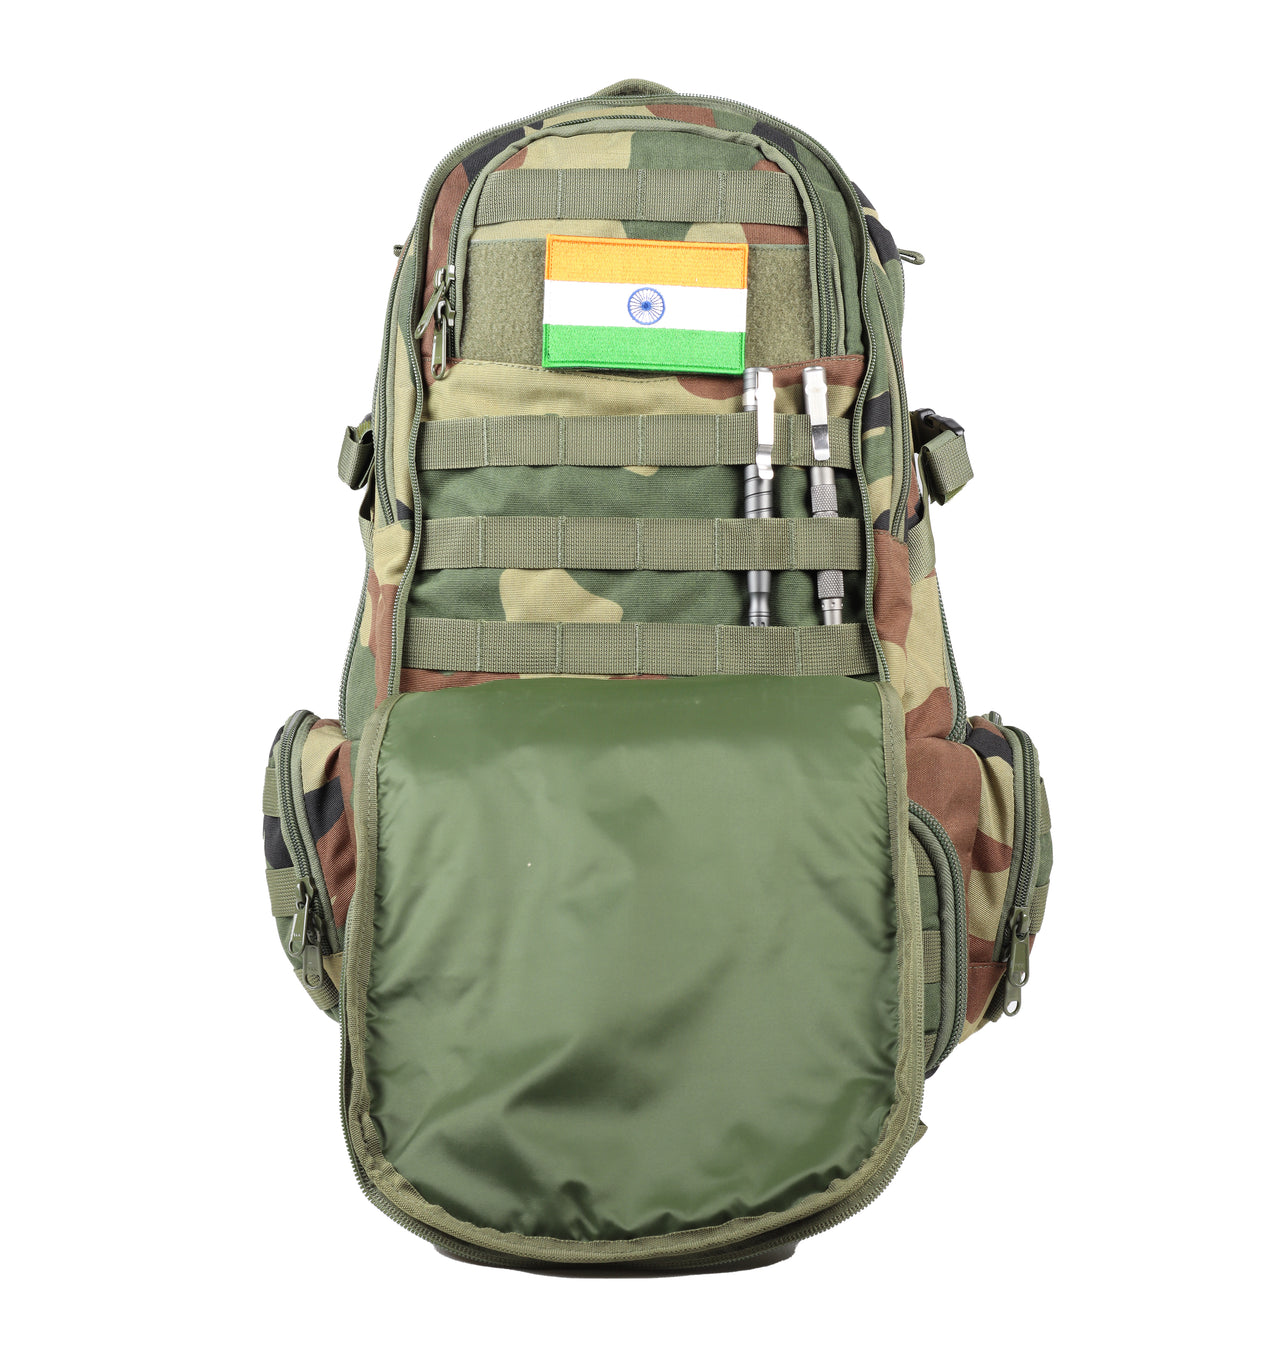 double compartment tactical backpack 40 ltrs camo with front